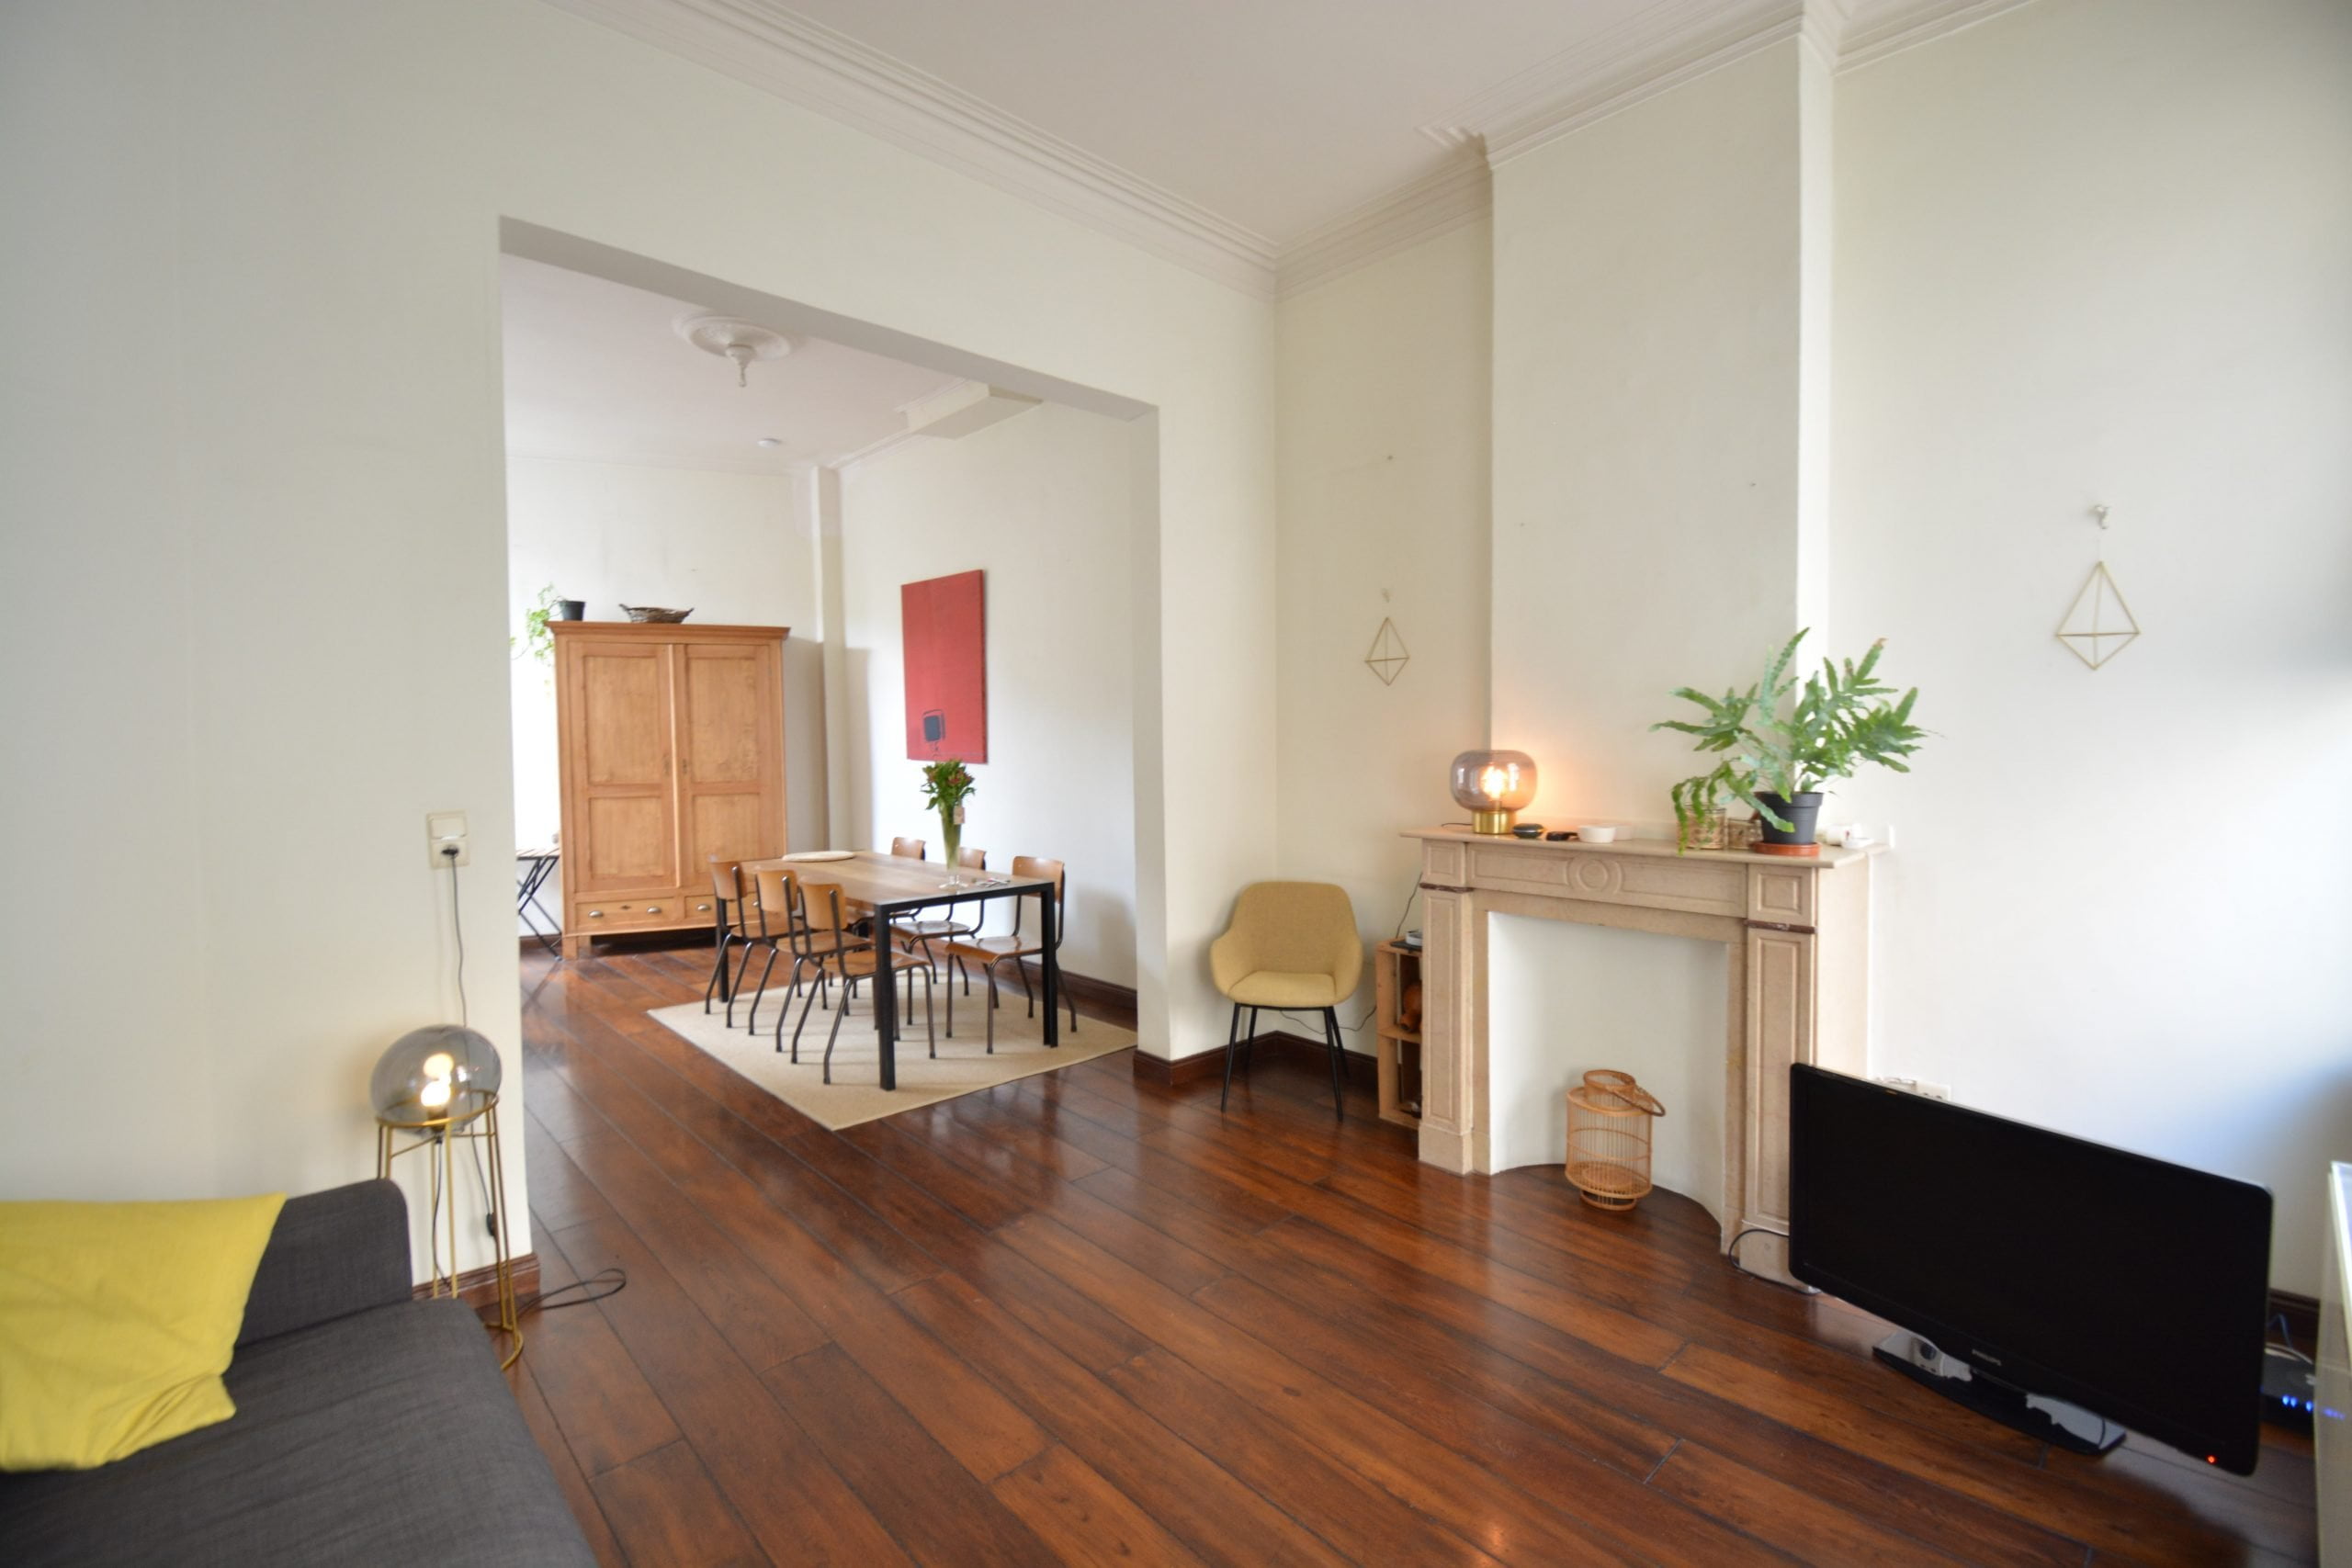 Dolfijn - Furnished house in Antwerp for expats